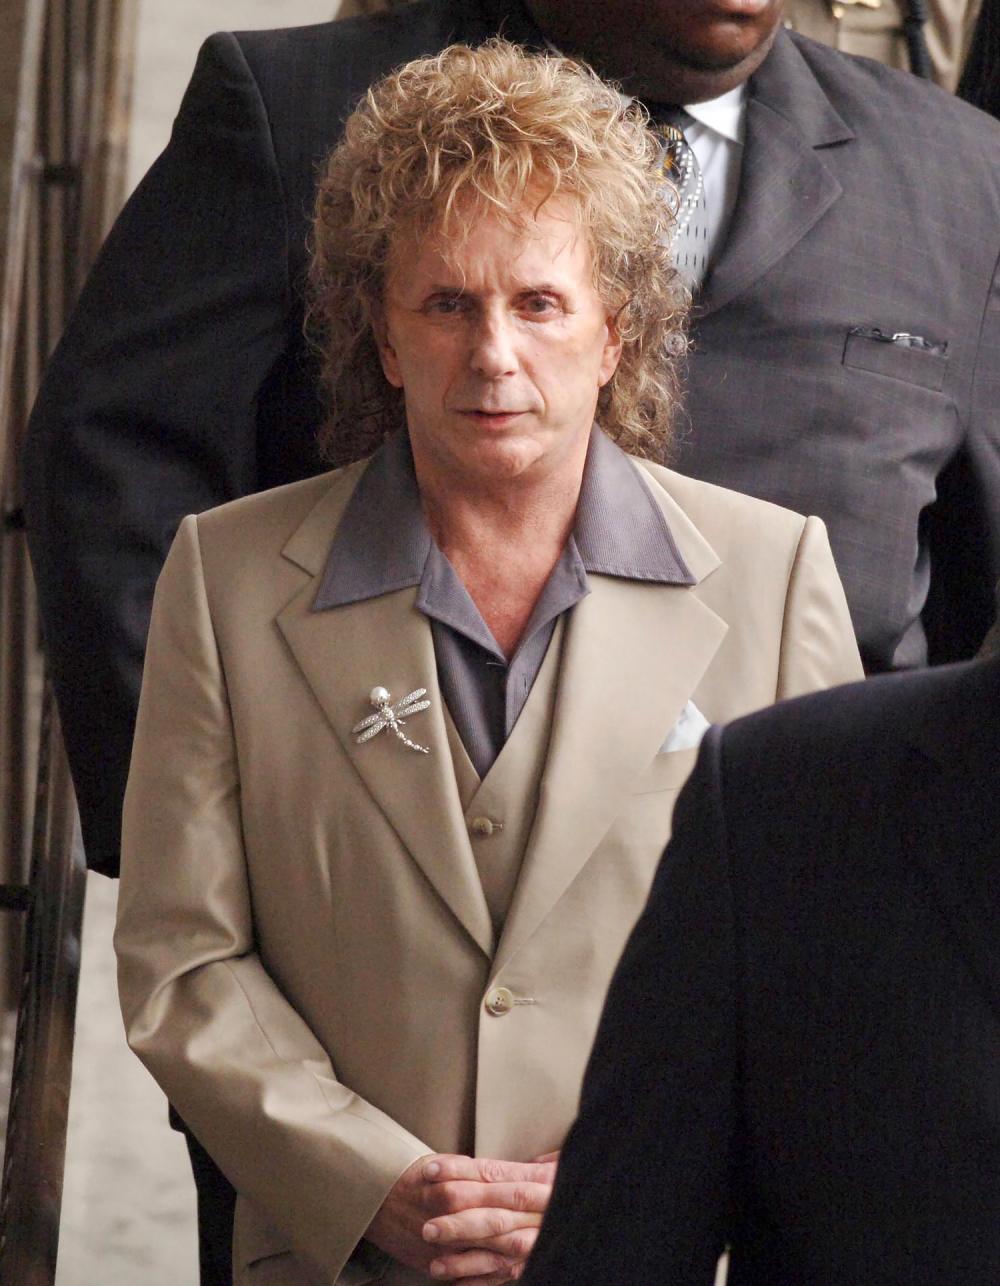 Phil Spector Dead: Controversial Music Producer Dies at 81